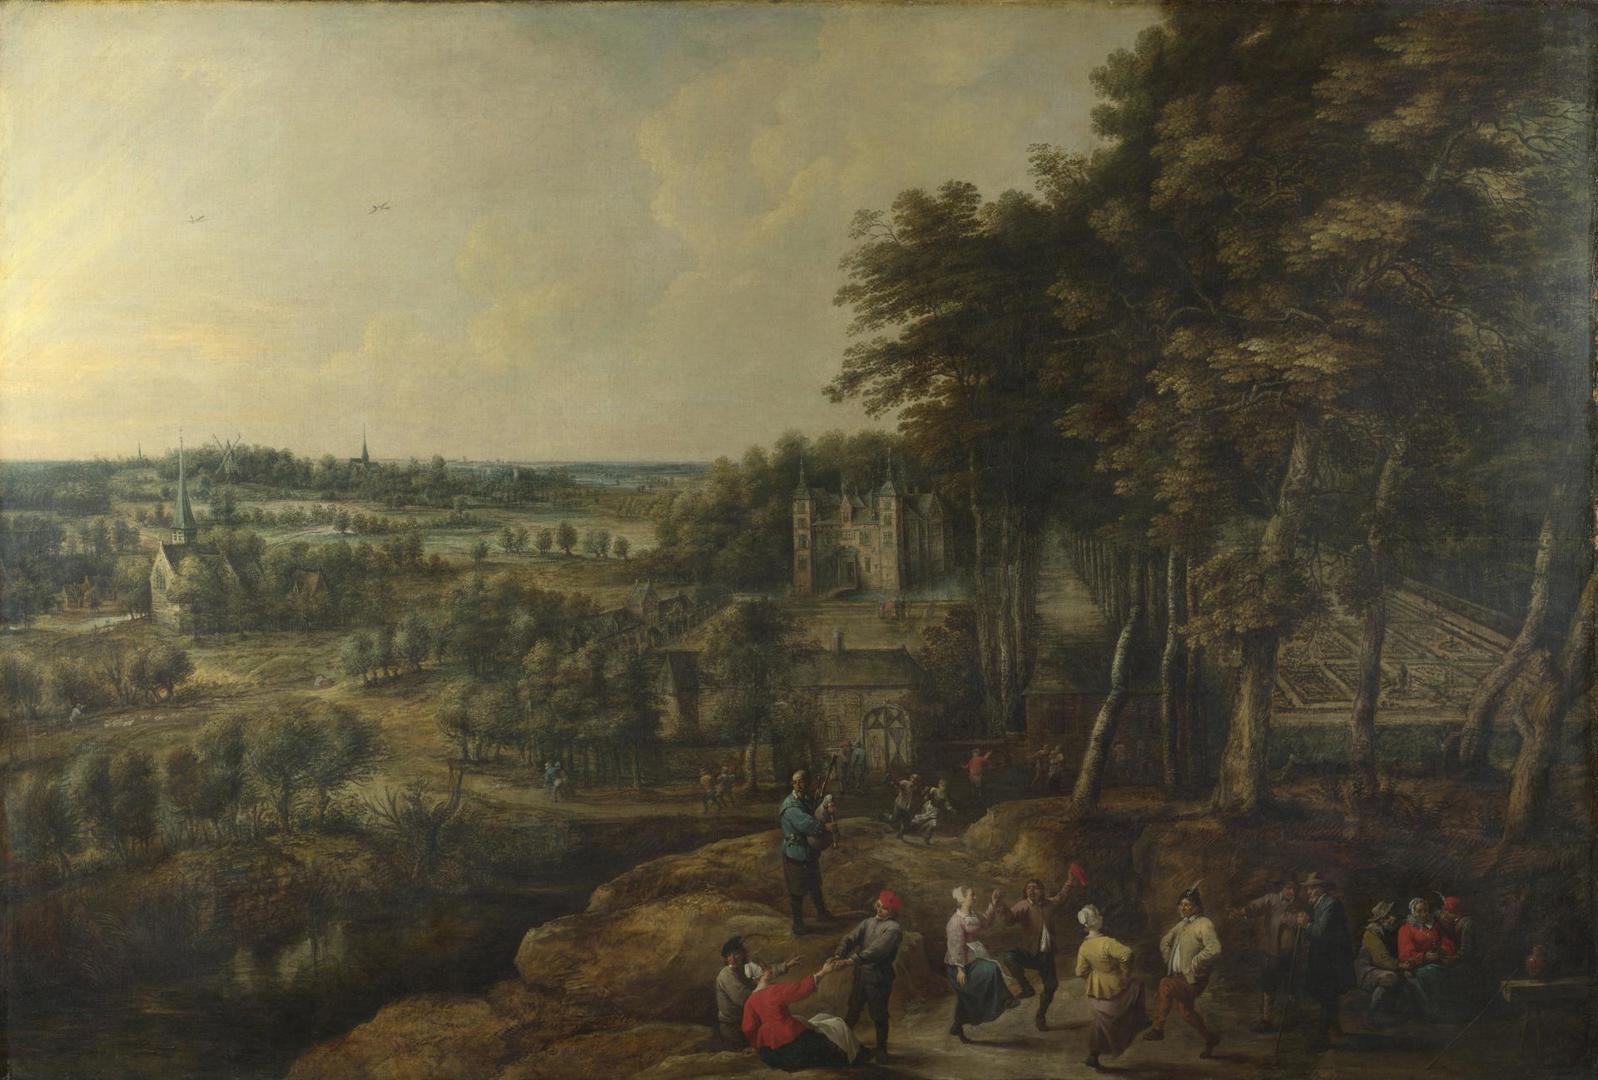 Peasants merry-making before a Country House by Lucas van Uden and David Teniers the Younger